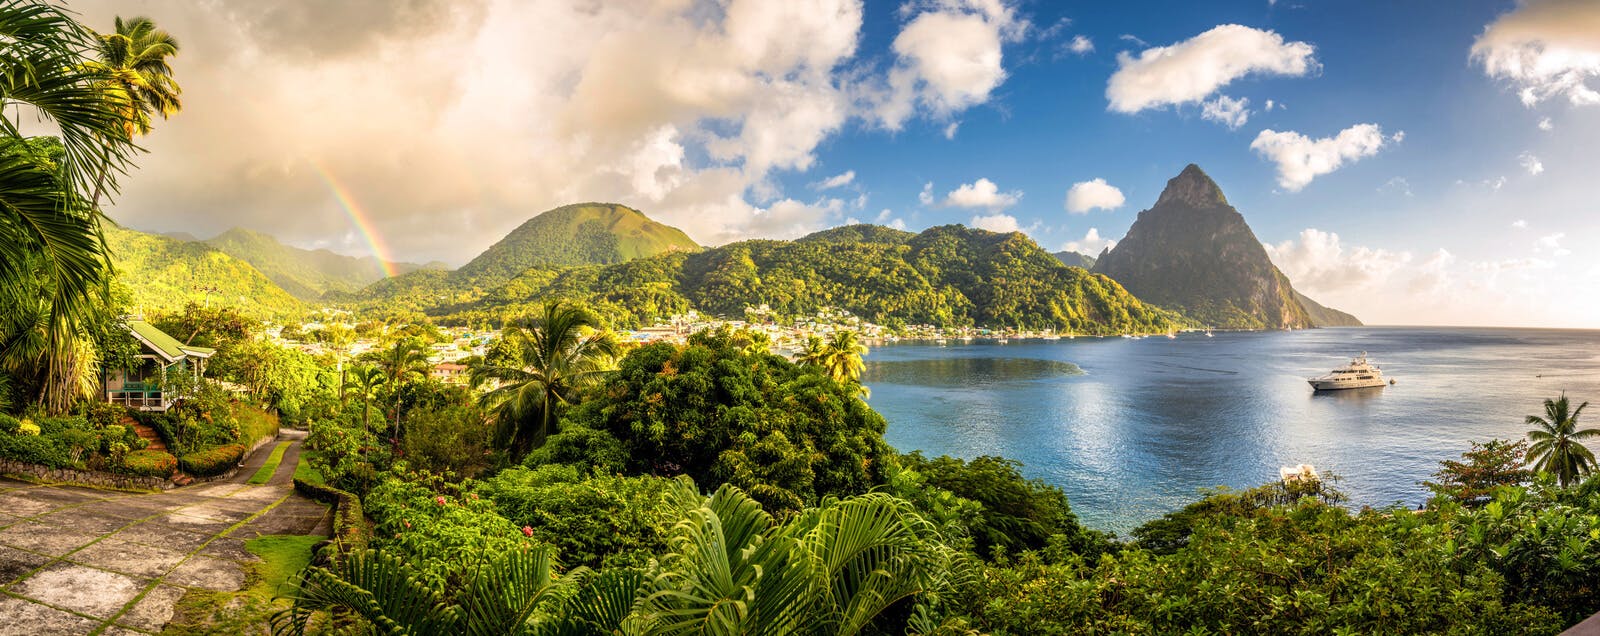 A panoramic view of the Pitons and a beach bay in Saint Lucia